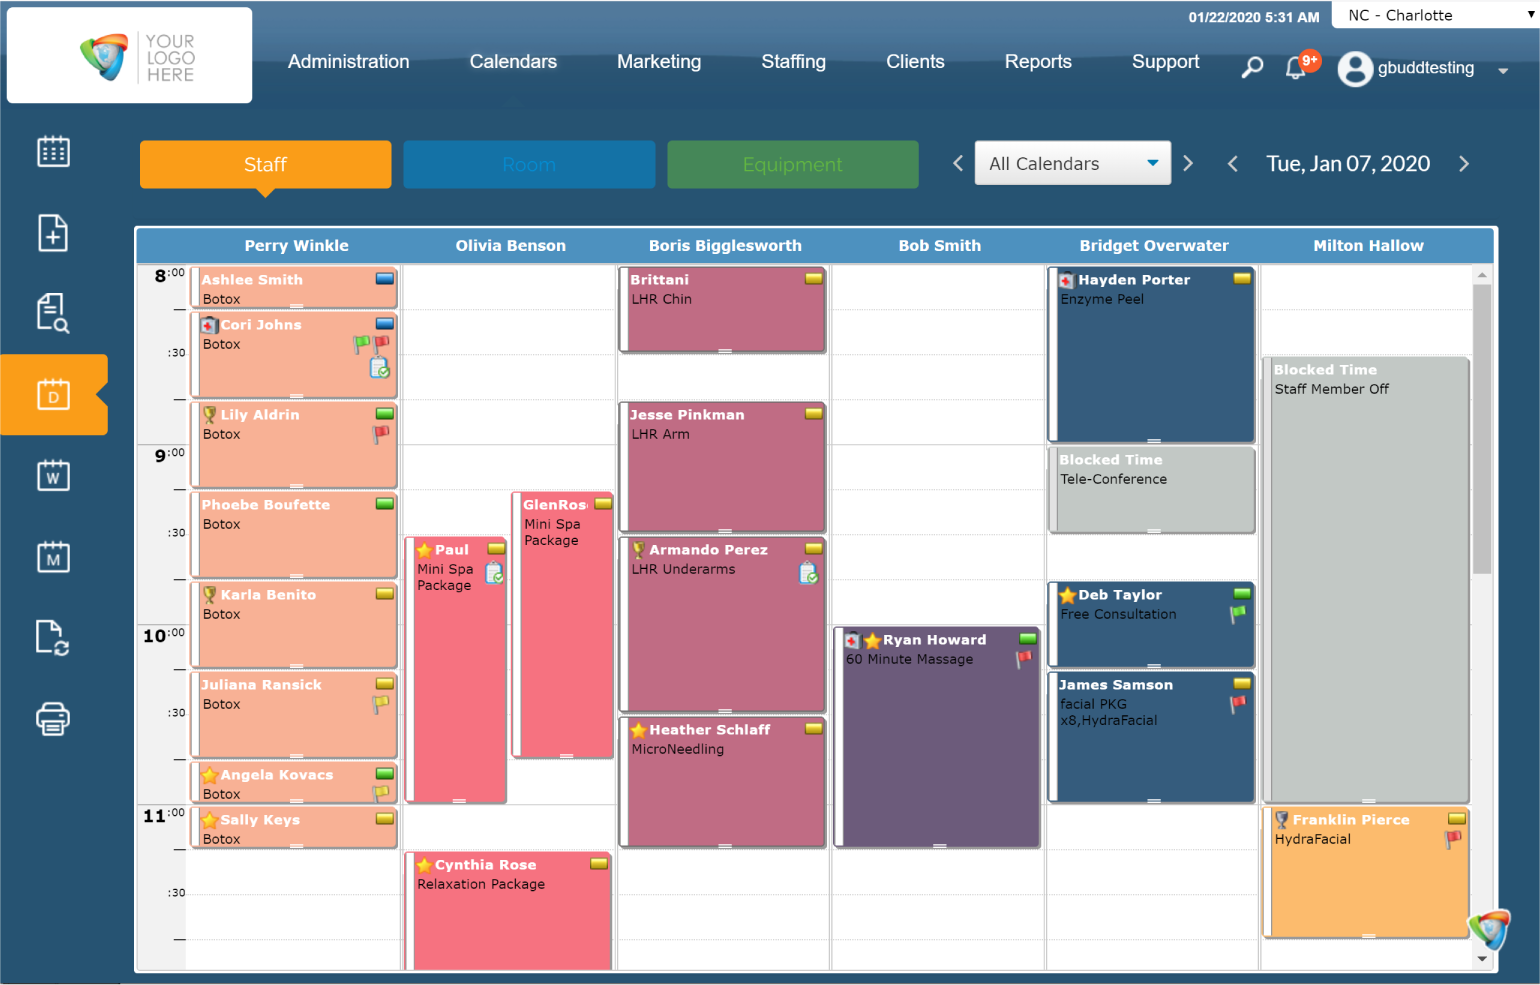 AestheticsPro Software - Integrated Calendar system for staff, rooms, equipment